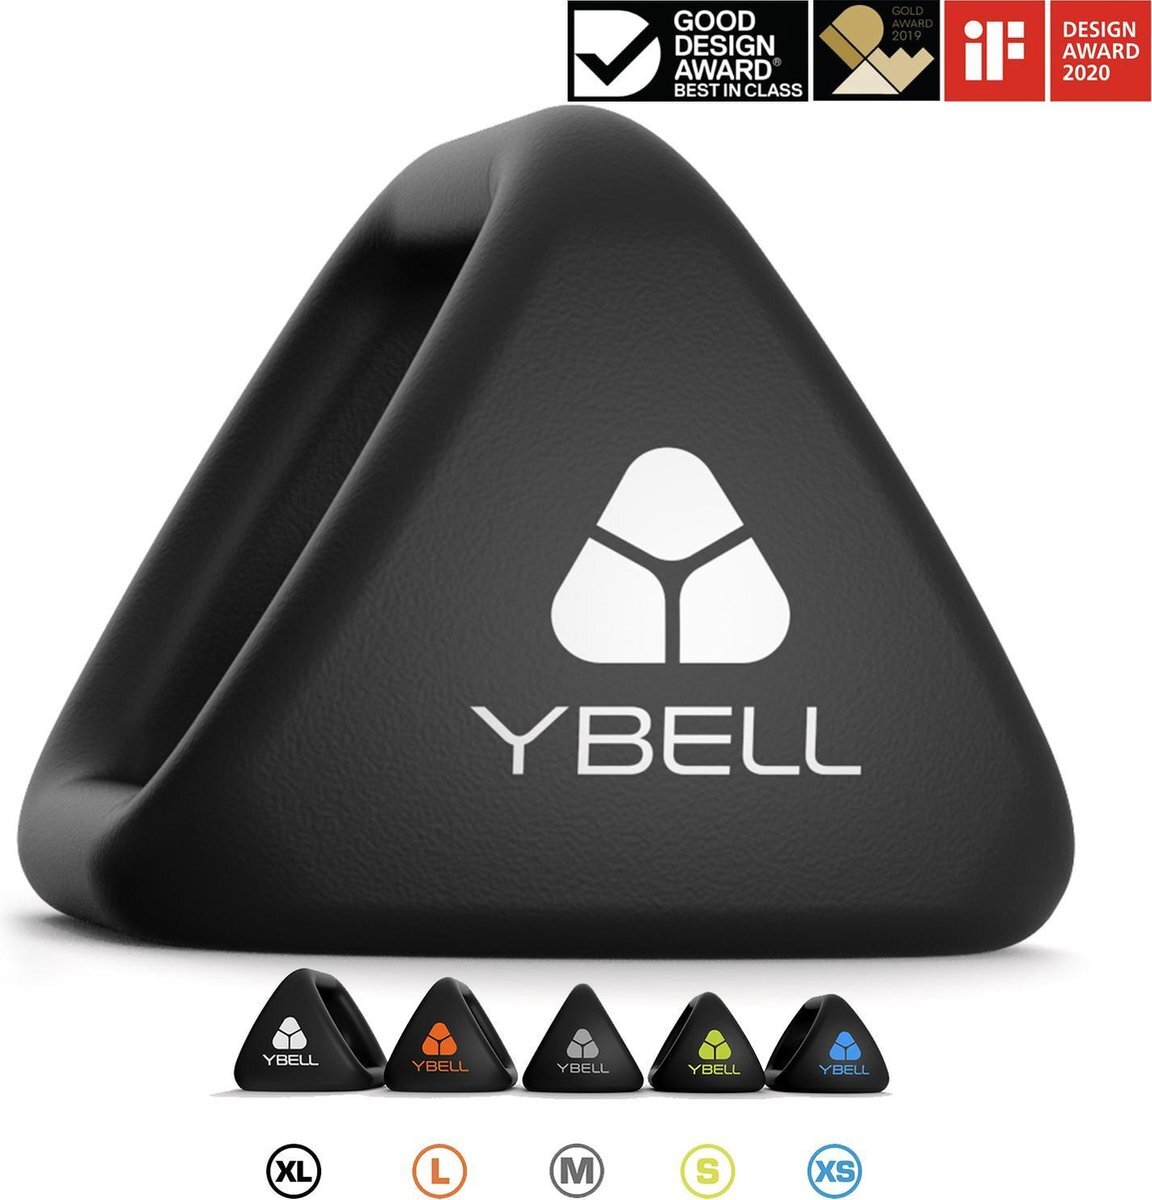 Ybell Neo XL 12kg